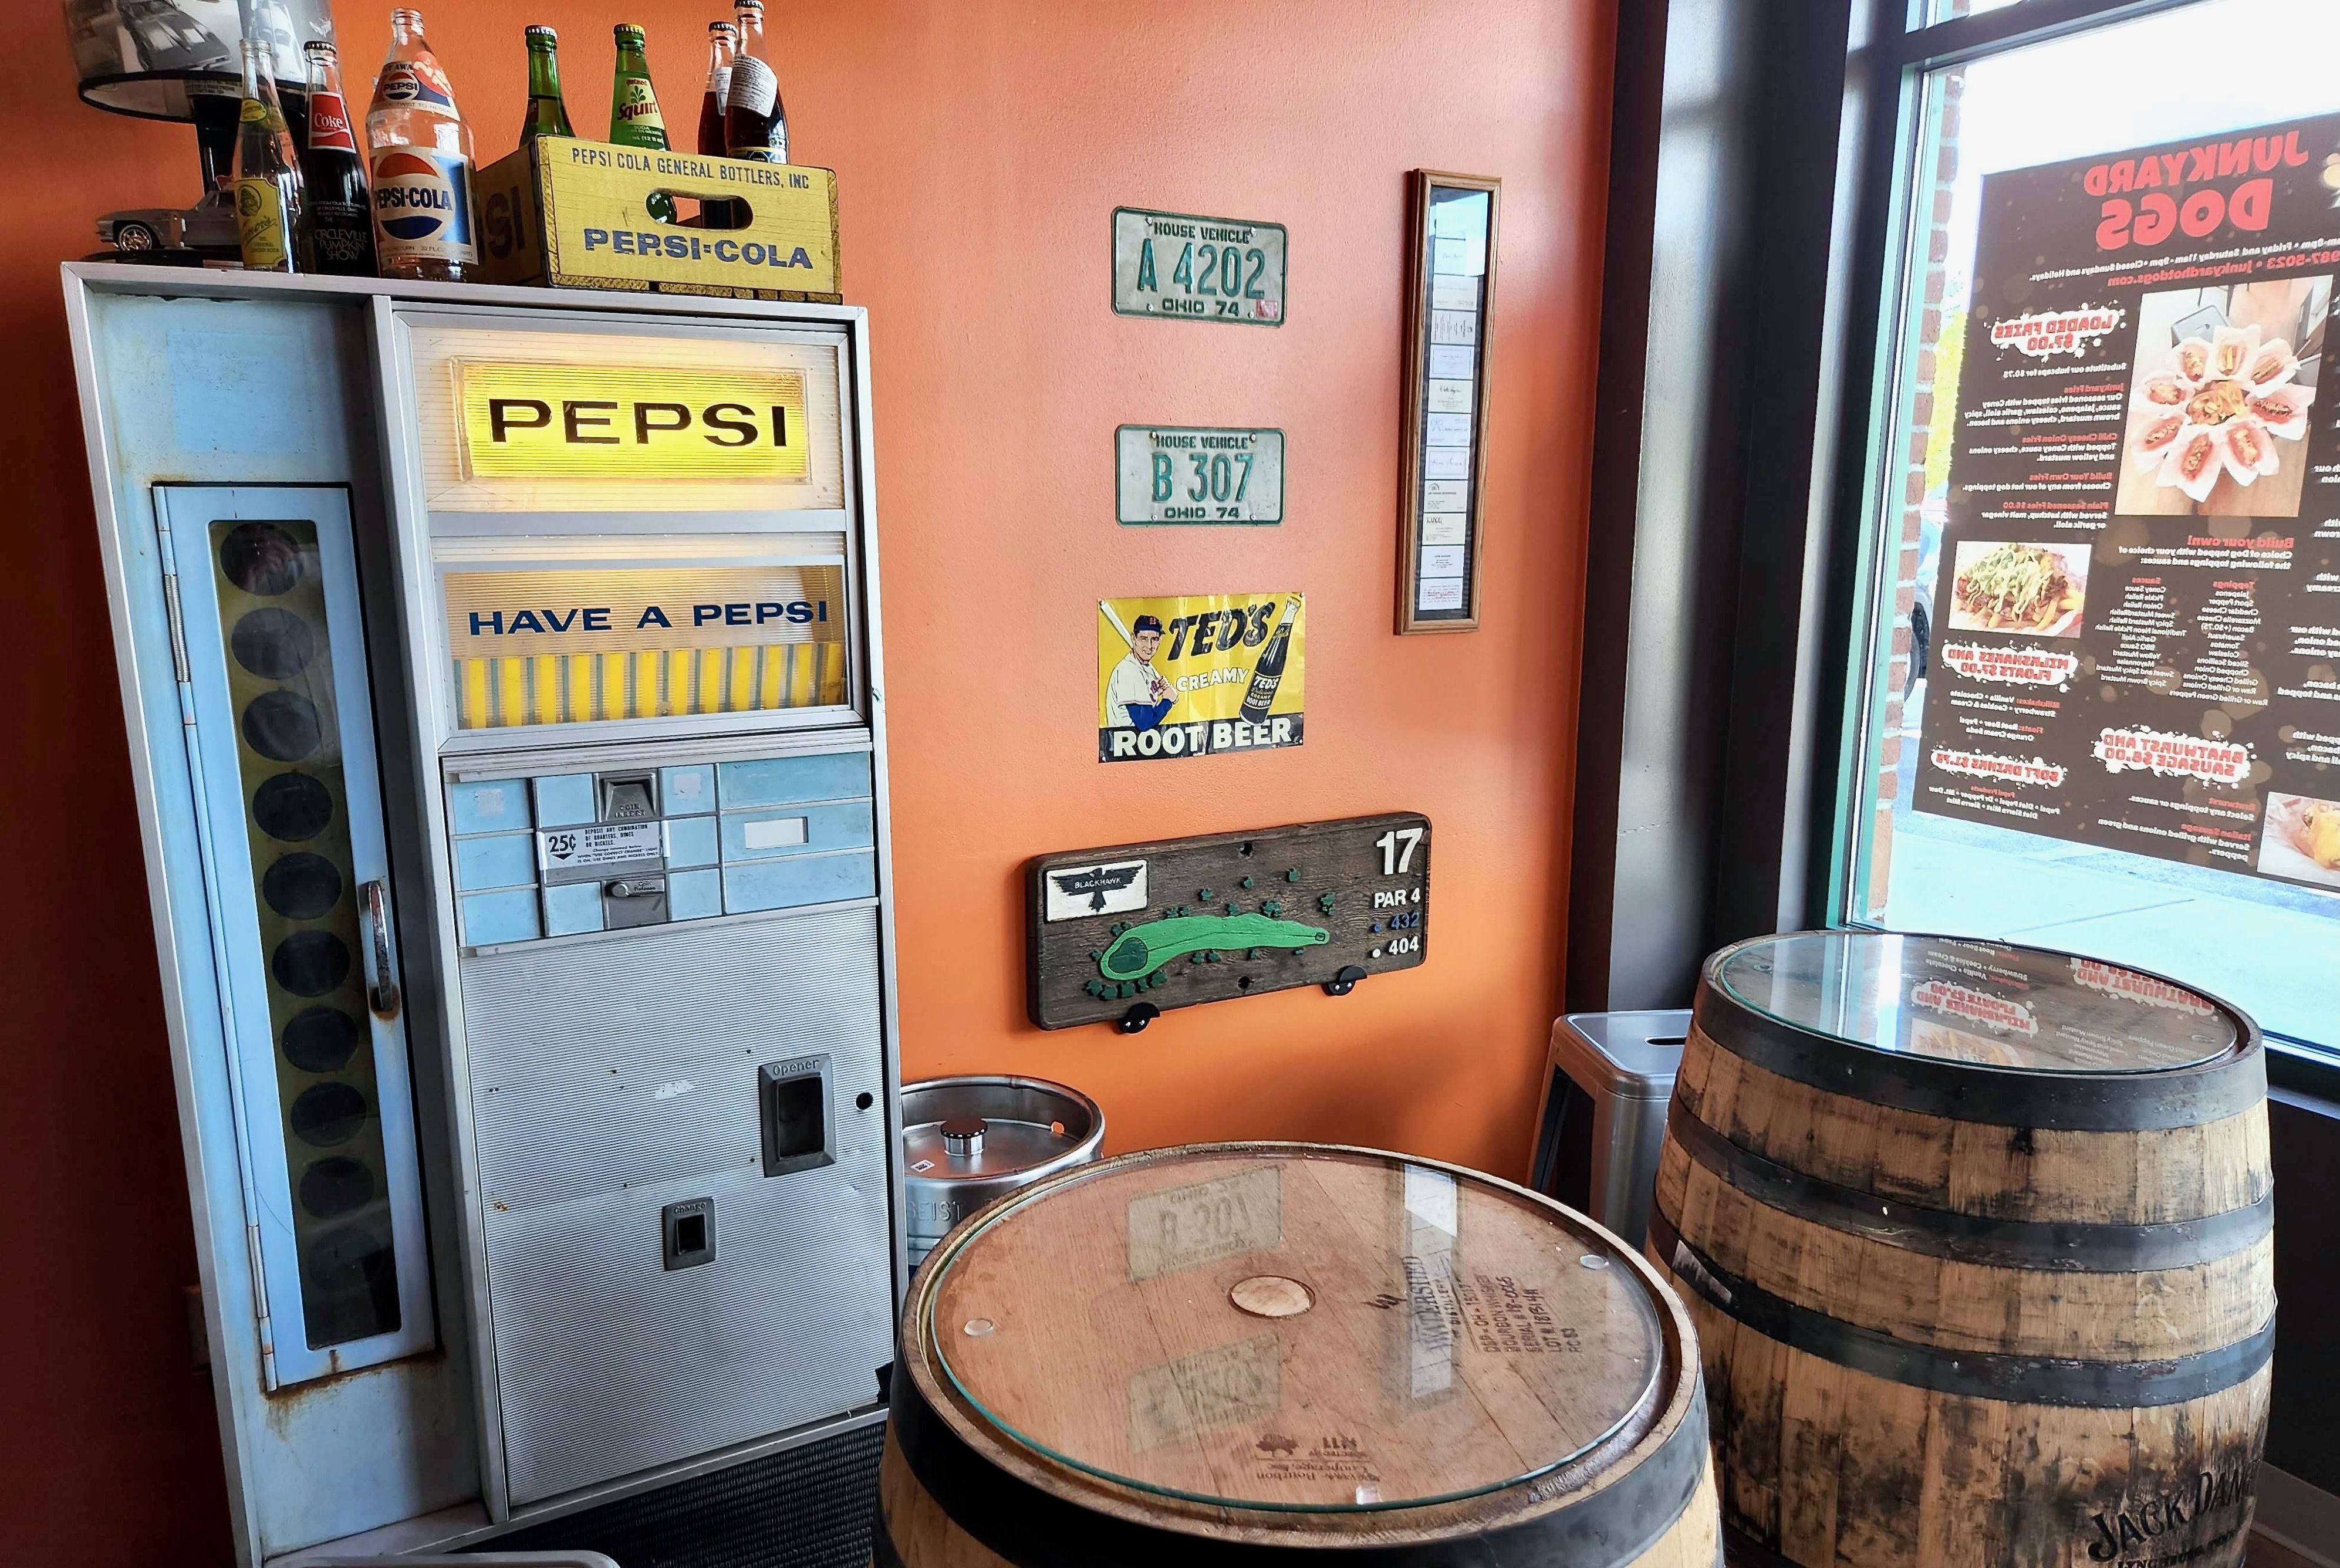 A vintage Pepsi vending machine amid two large barrels and old license plates lining an orange wall